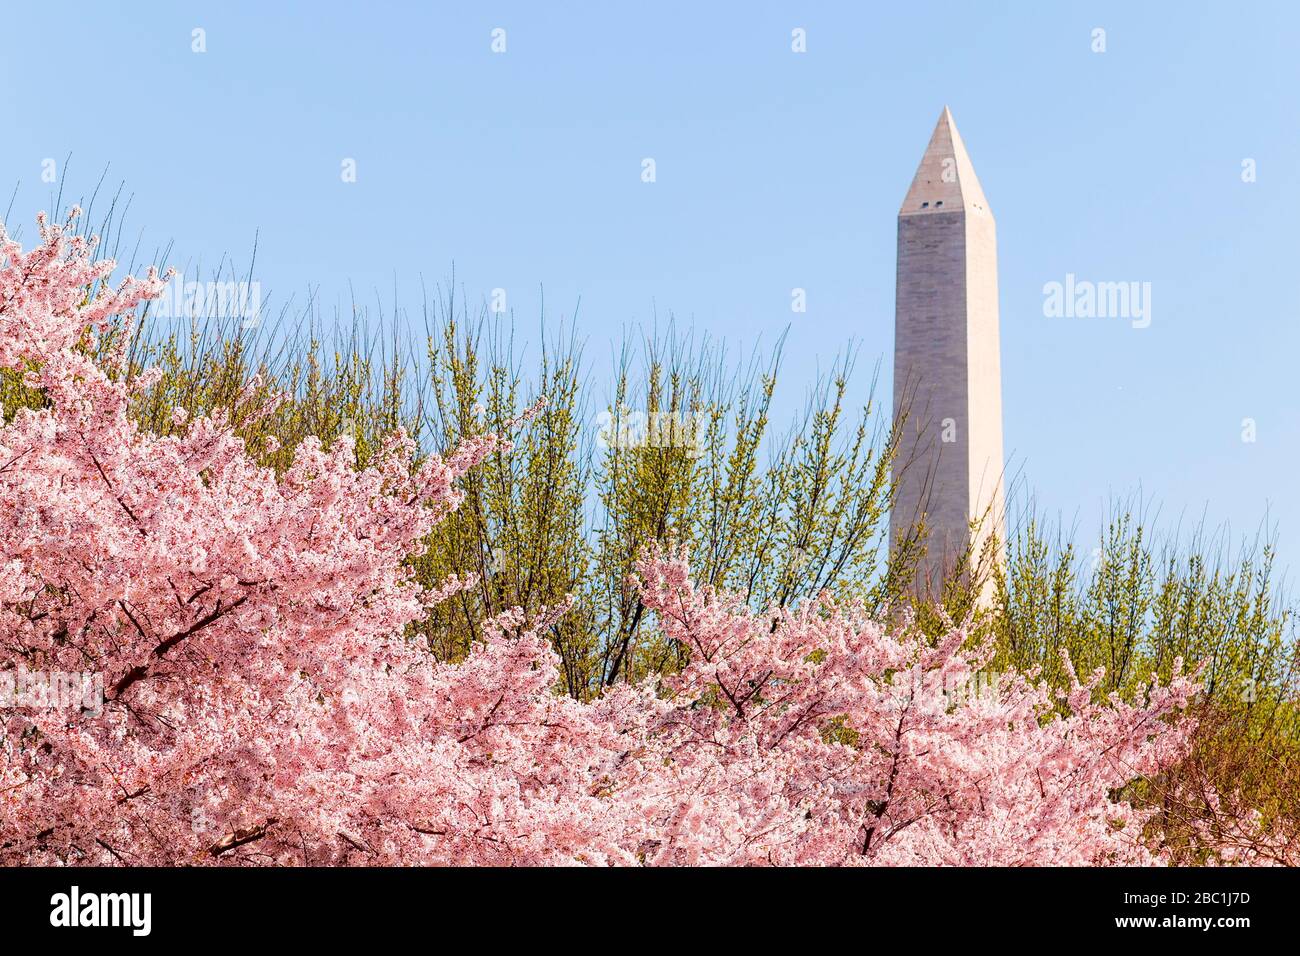 Washington Dc April 3 2019 Cherry Blossom Festival With Washington Memorial Around The Tidal Basin Stock Photo Alamy,How To Clean A Kitchen Faucet Spray Head